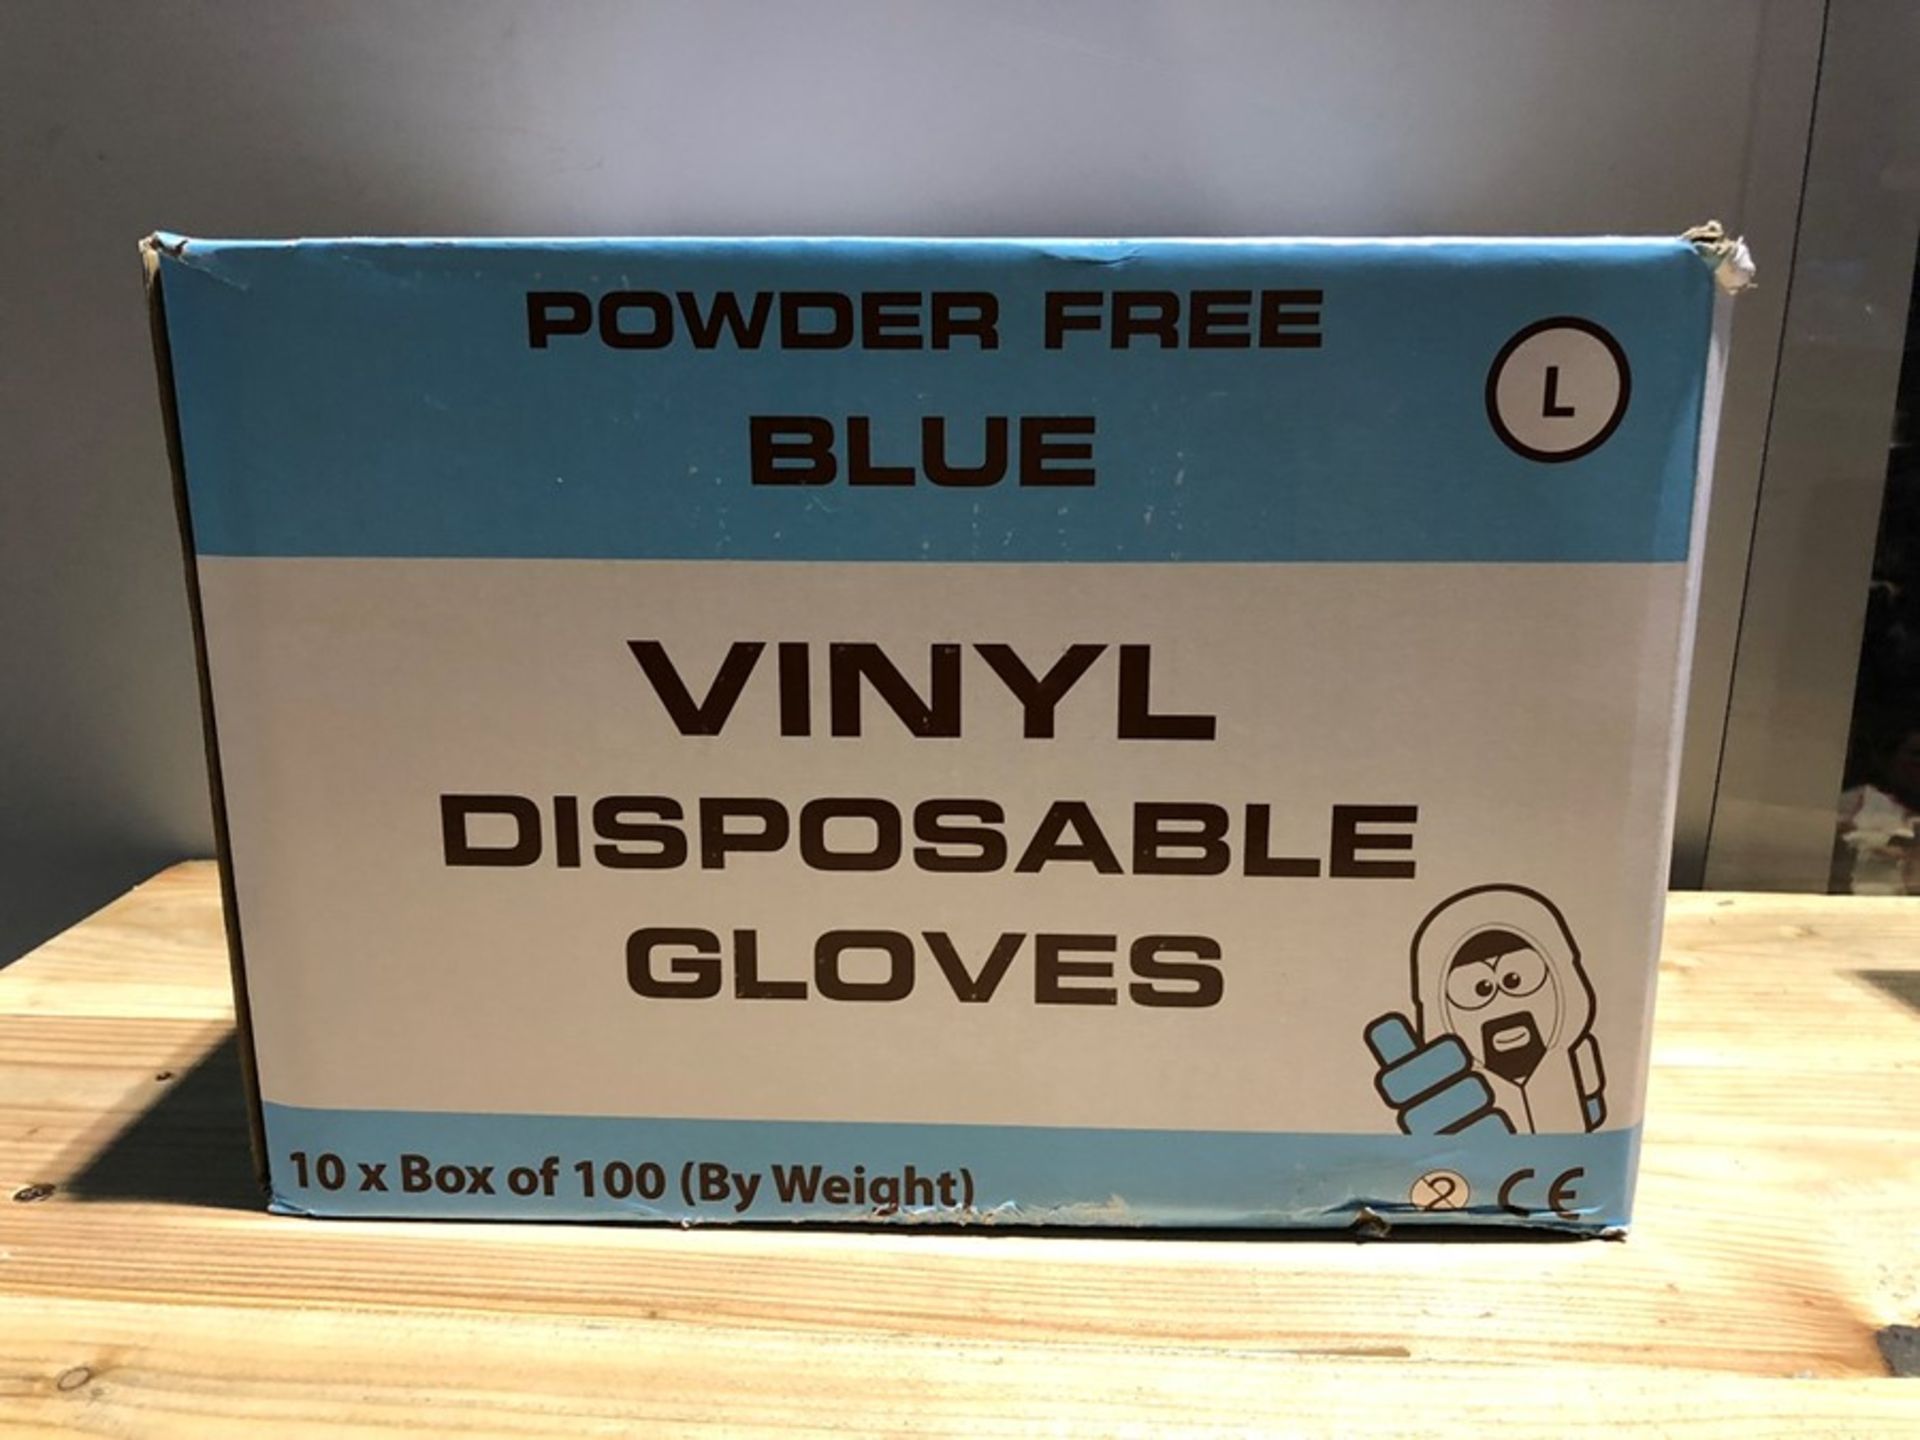 1 LOT TO CONTAIN 10 BOXES OF CLICK 2000 VINYL DISPOSABLE GLOVES POWDER FREE / SIZE: L (PUBLIC